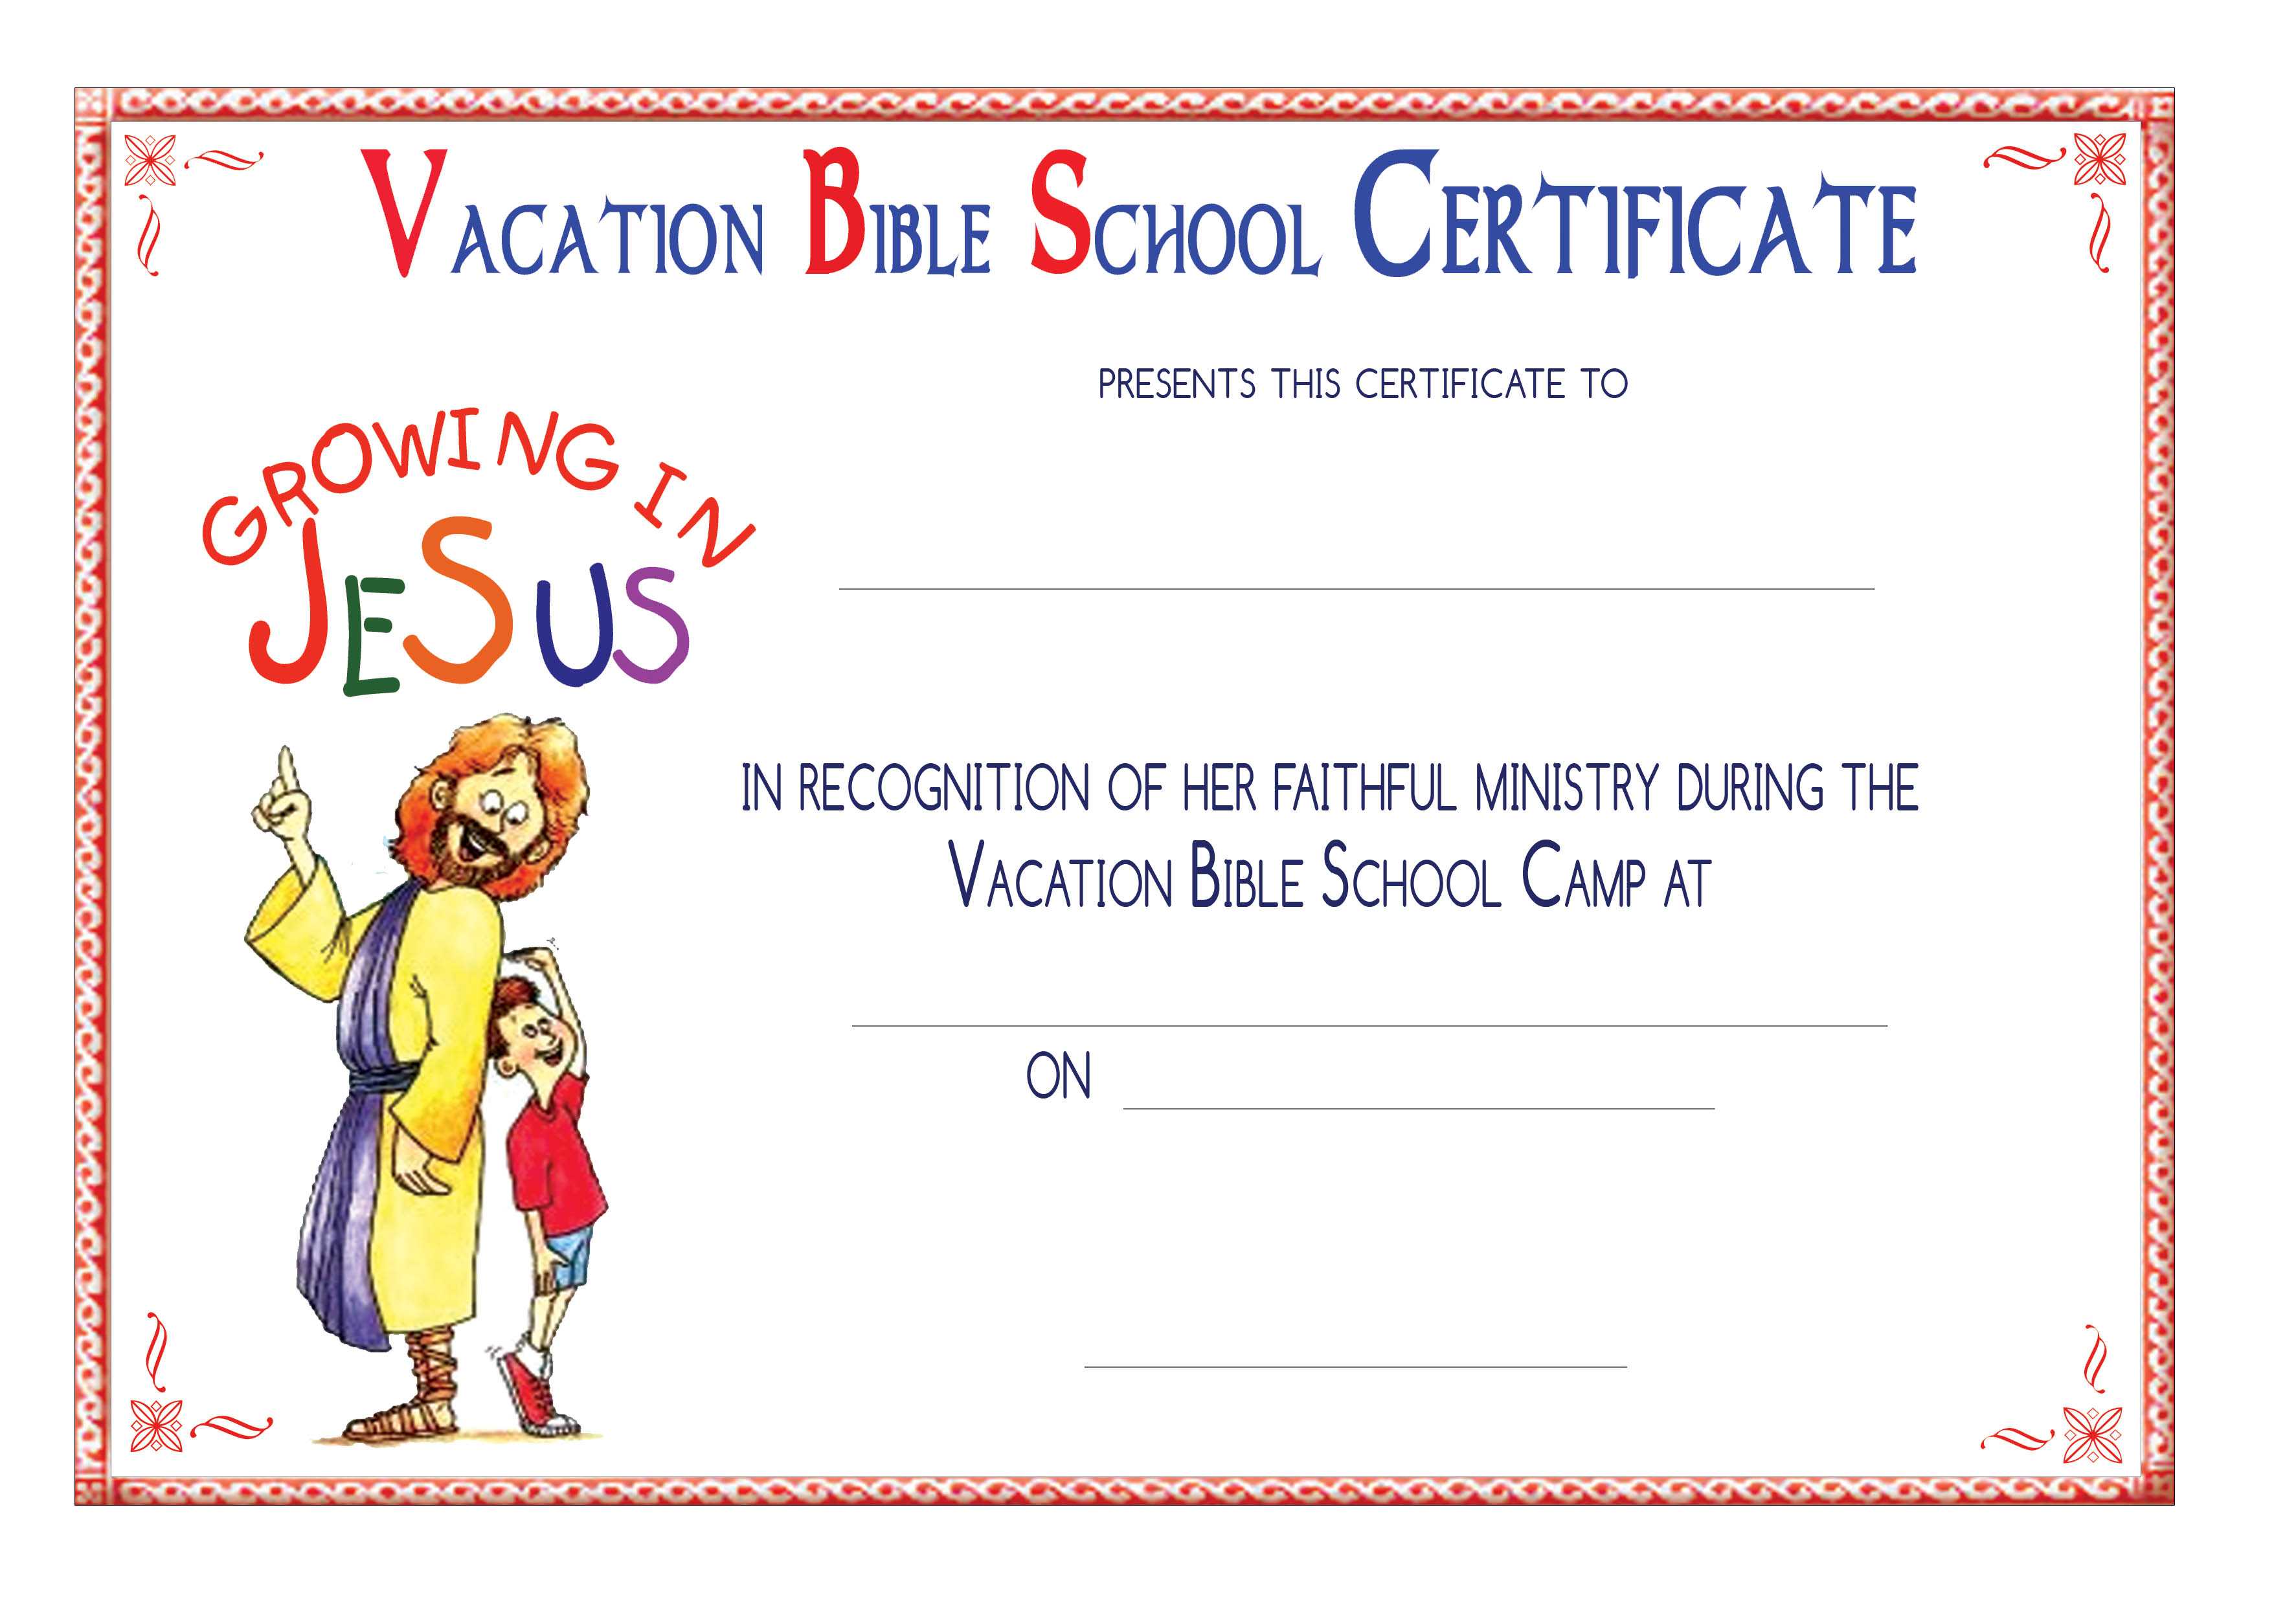 Certificate Templates: 5 Best Images Of Printable Vbs For Free School Certificate Templates